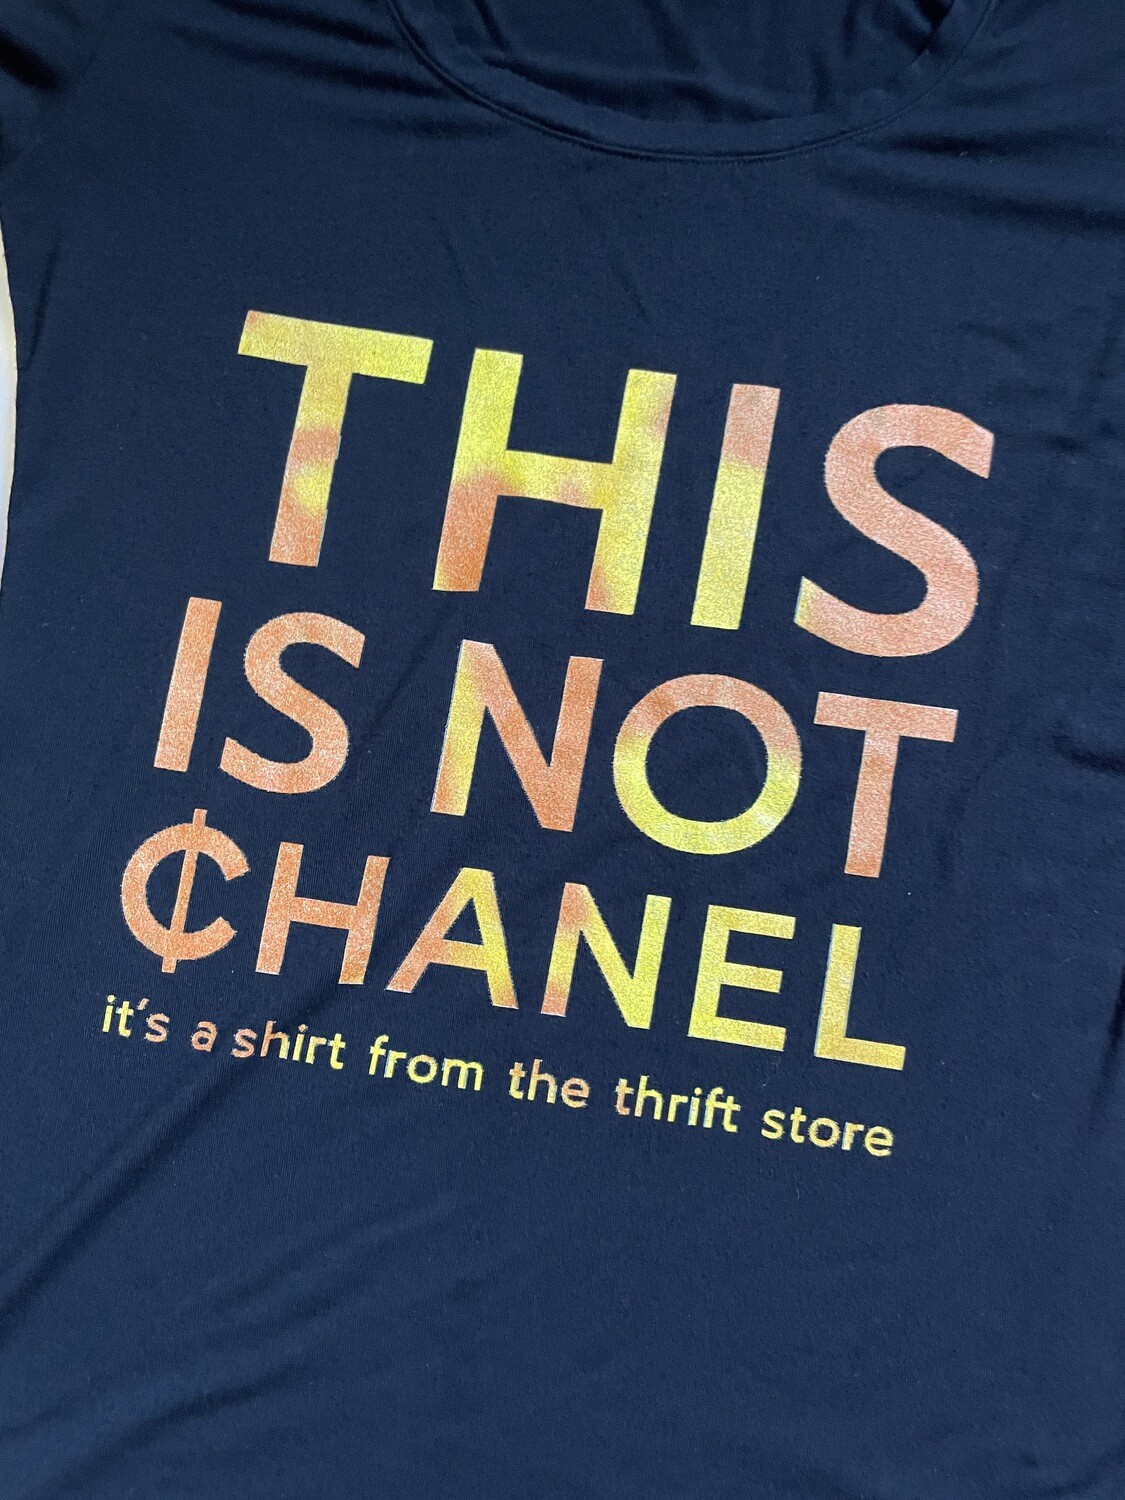 This Is Not ¢hanel - NFC clothing - Womxn Scoop Neck